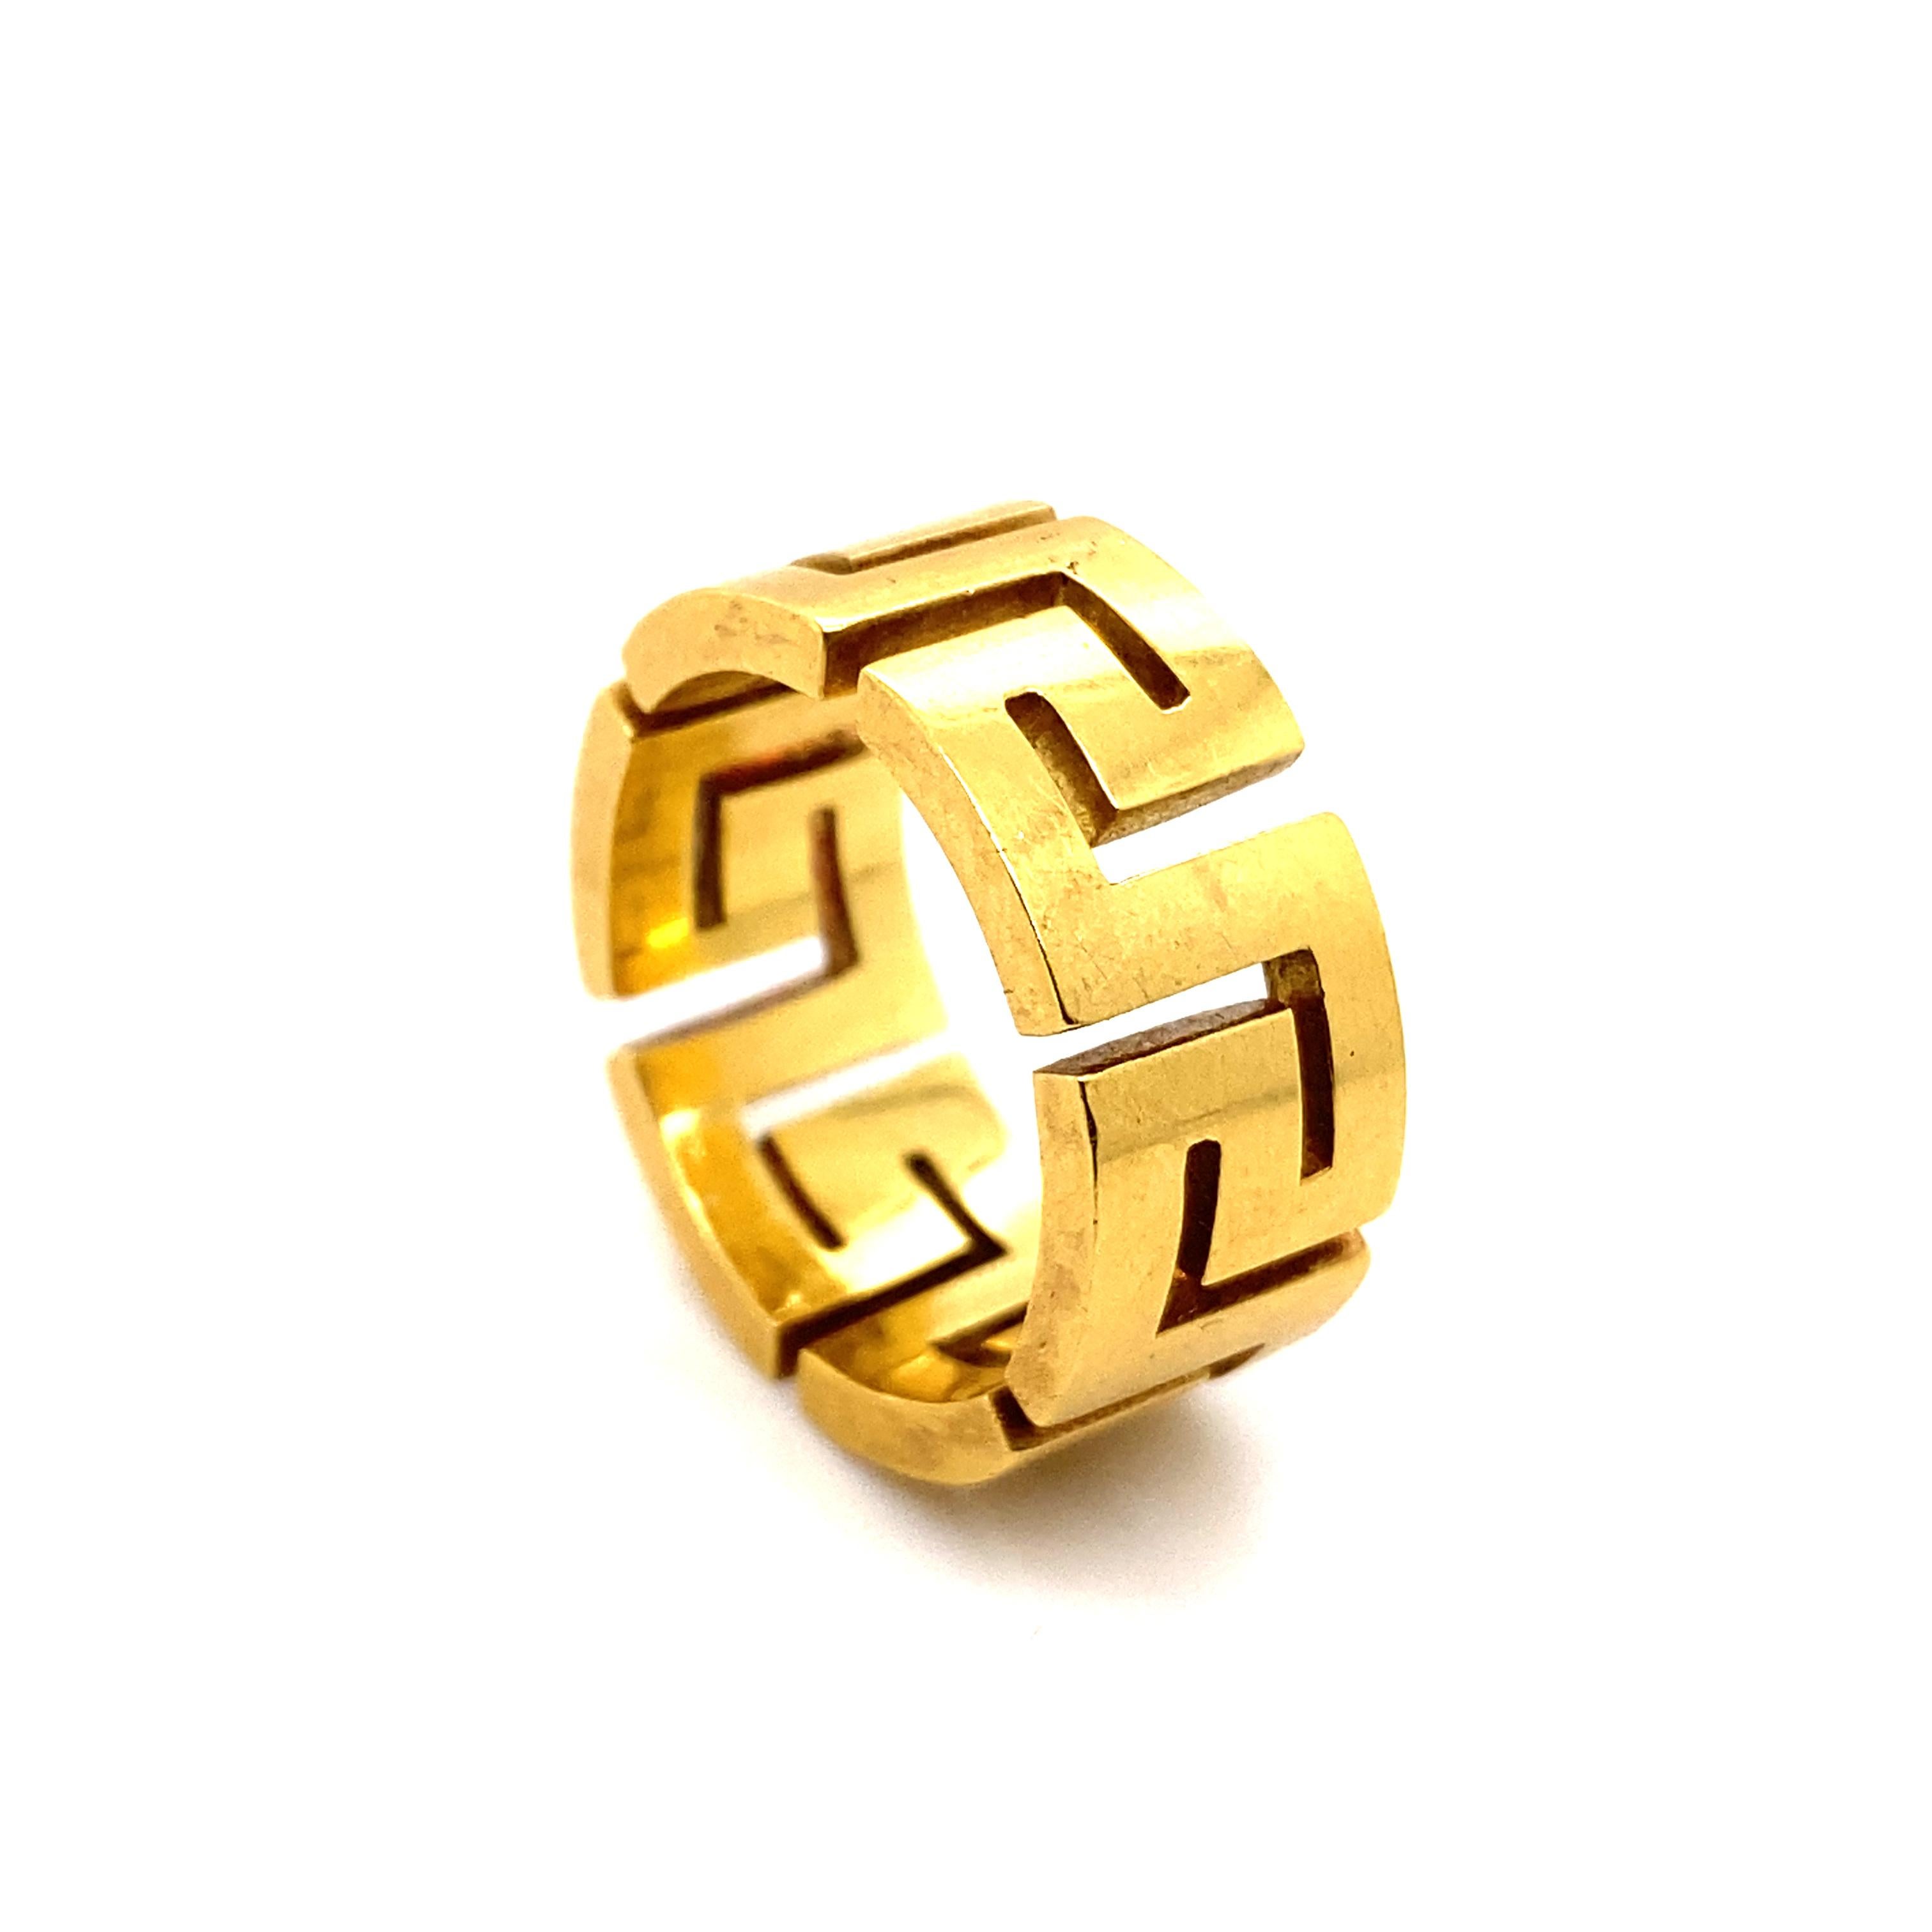 A Tiffany zig zag 18 karat yellow gold ring

An unusual ring by Tiffany & Co designed as a series of plain polished zig zags for a bold design statement!

Stamped 'TIFFANY & CO' 18K to the inside of the band.

Dimensions:
Width - 9.15mm 
Depth